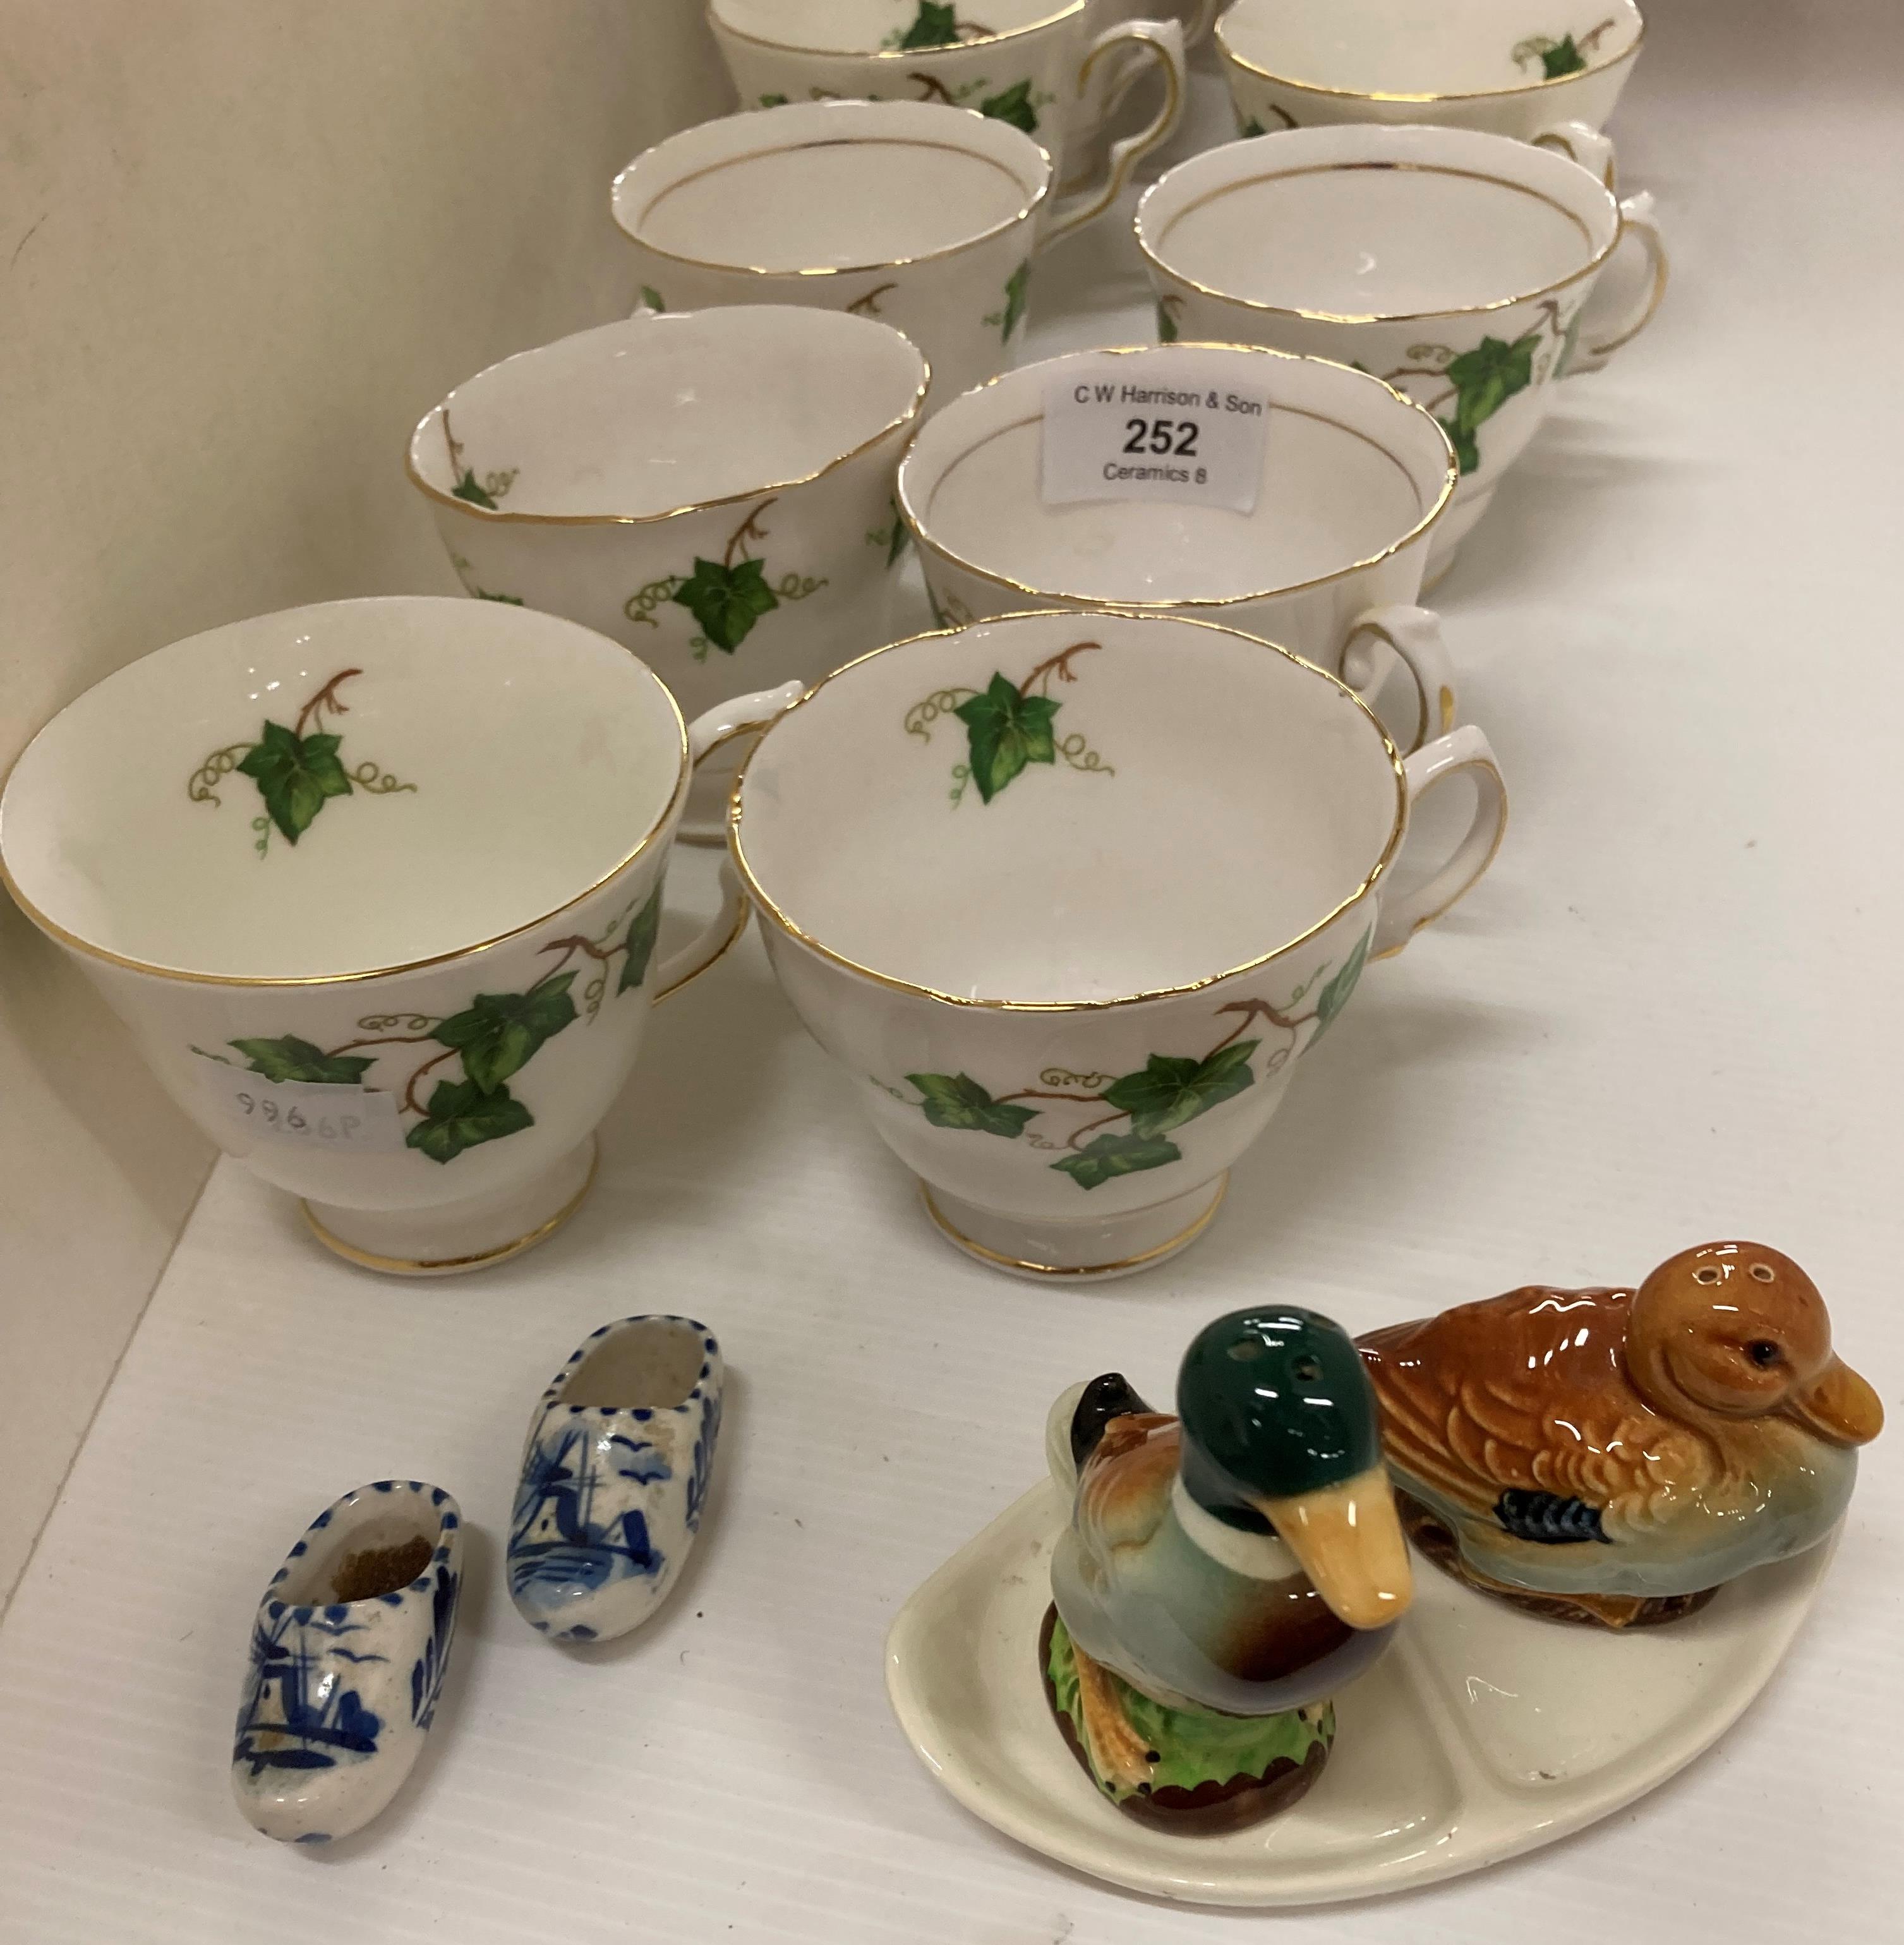 Forty pieces of Colclough Bone China ivy patterned tea service - side plates, cups, saucers, - Image 2 of 2